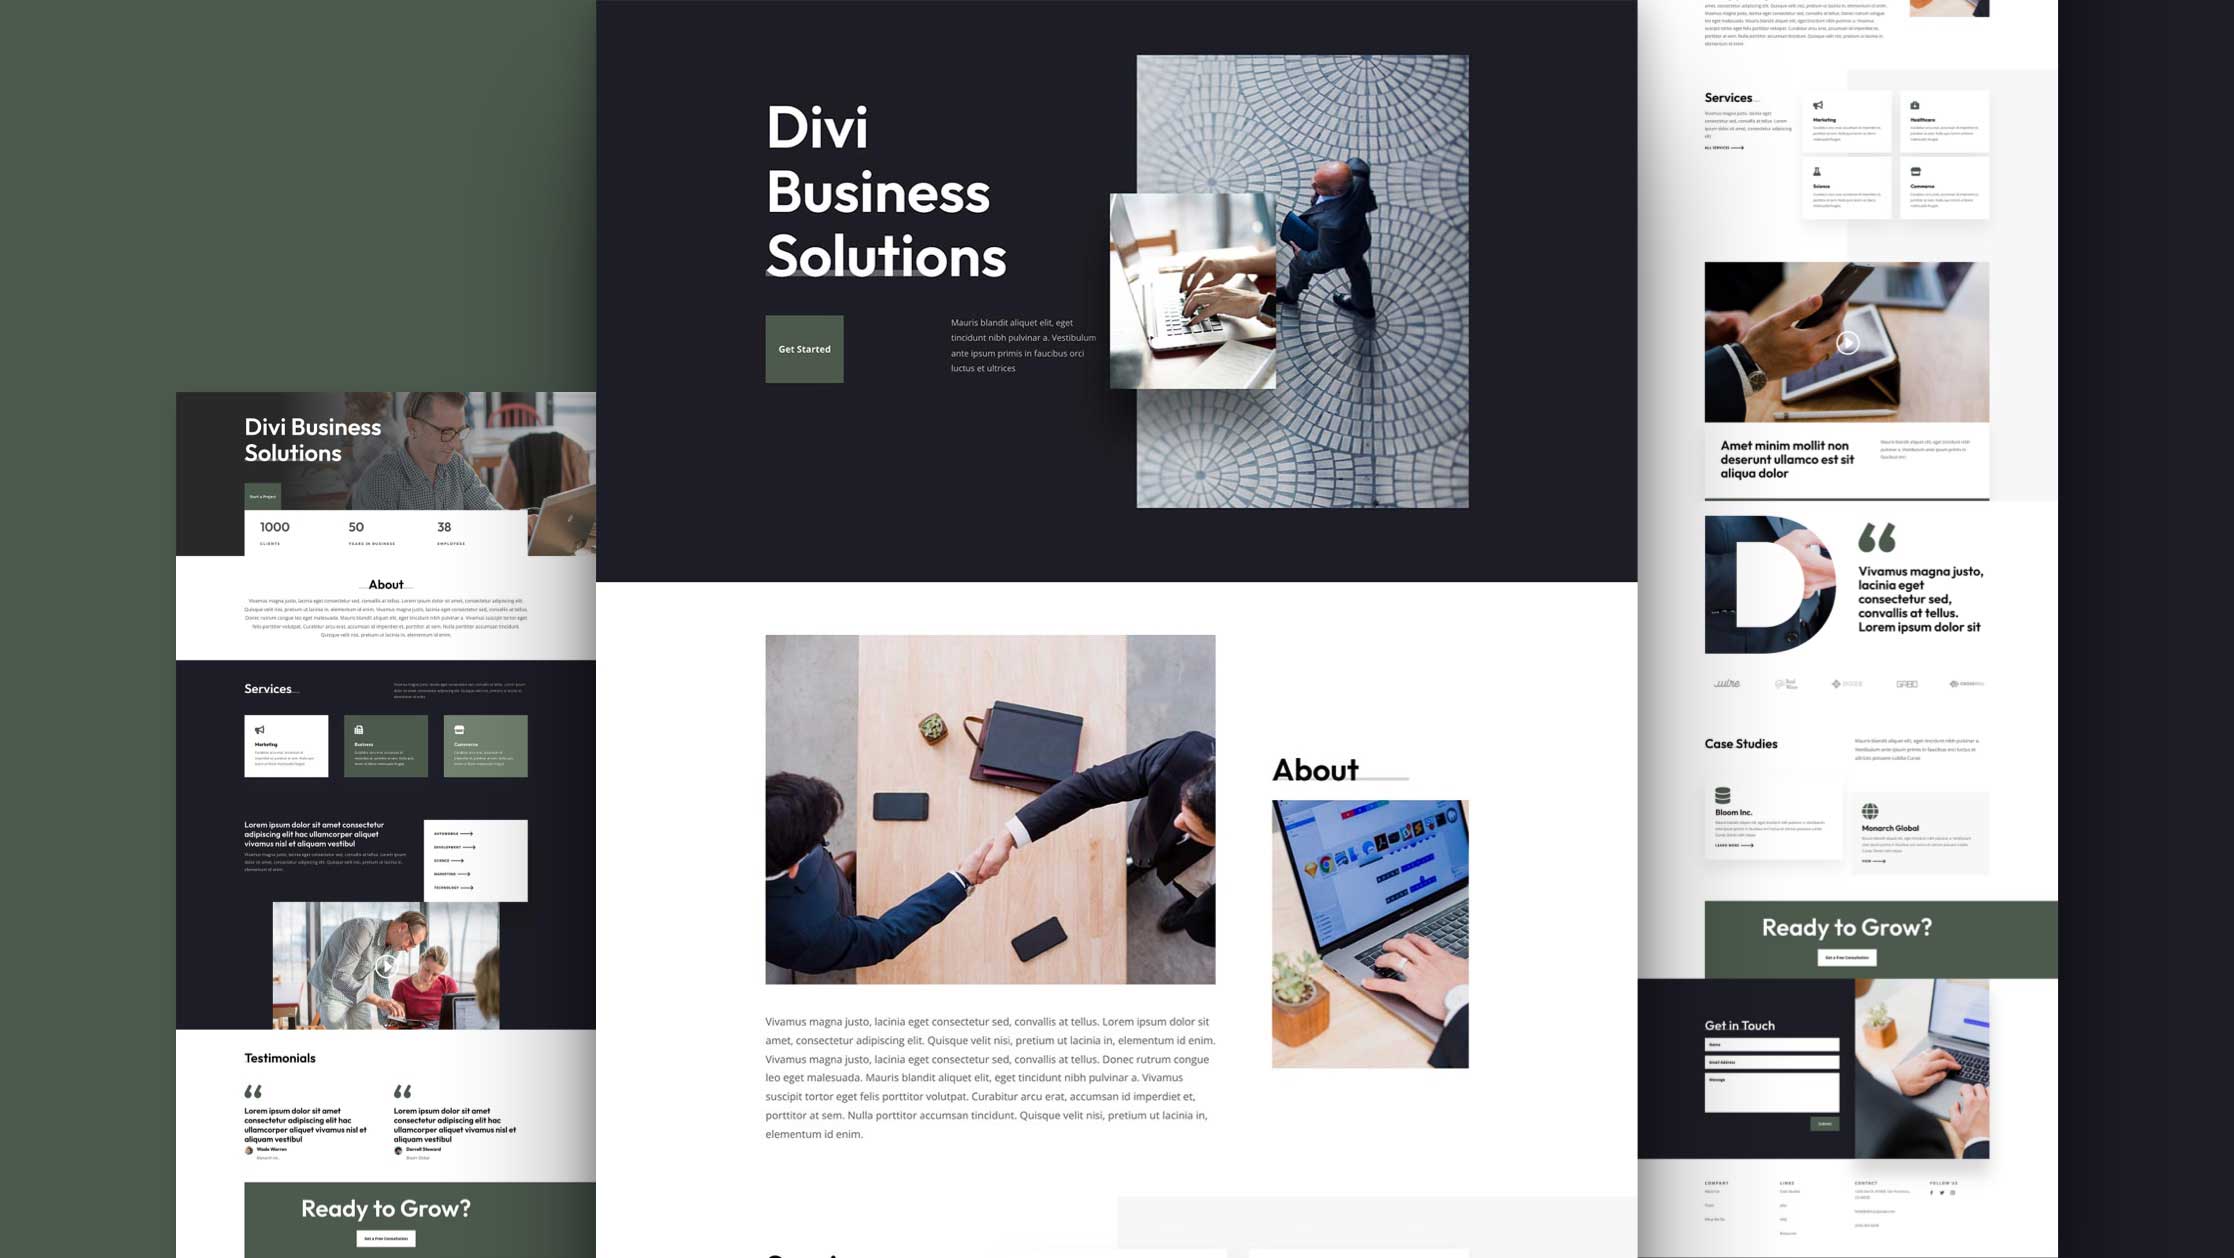 Get a FREE Corporate Layout Pack for Divi